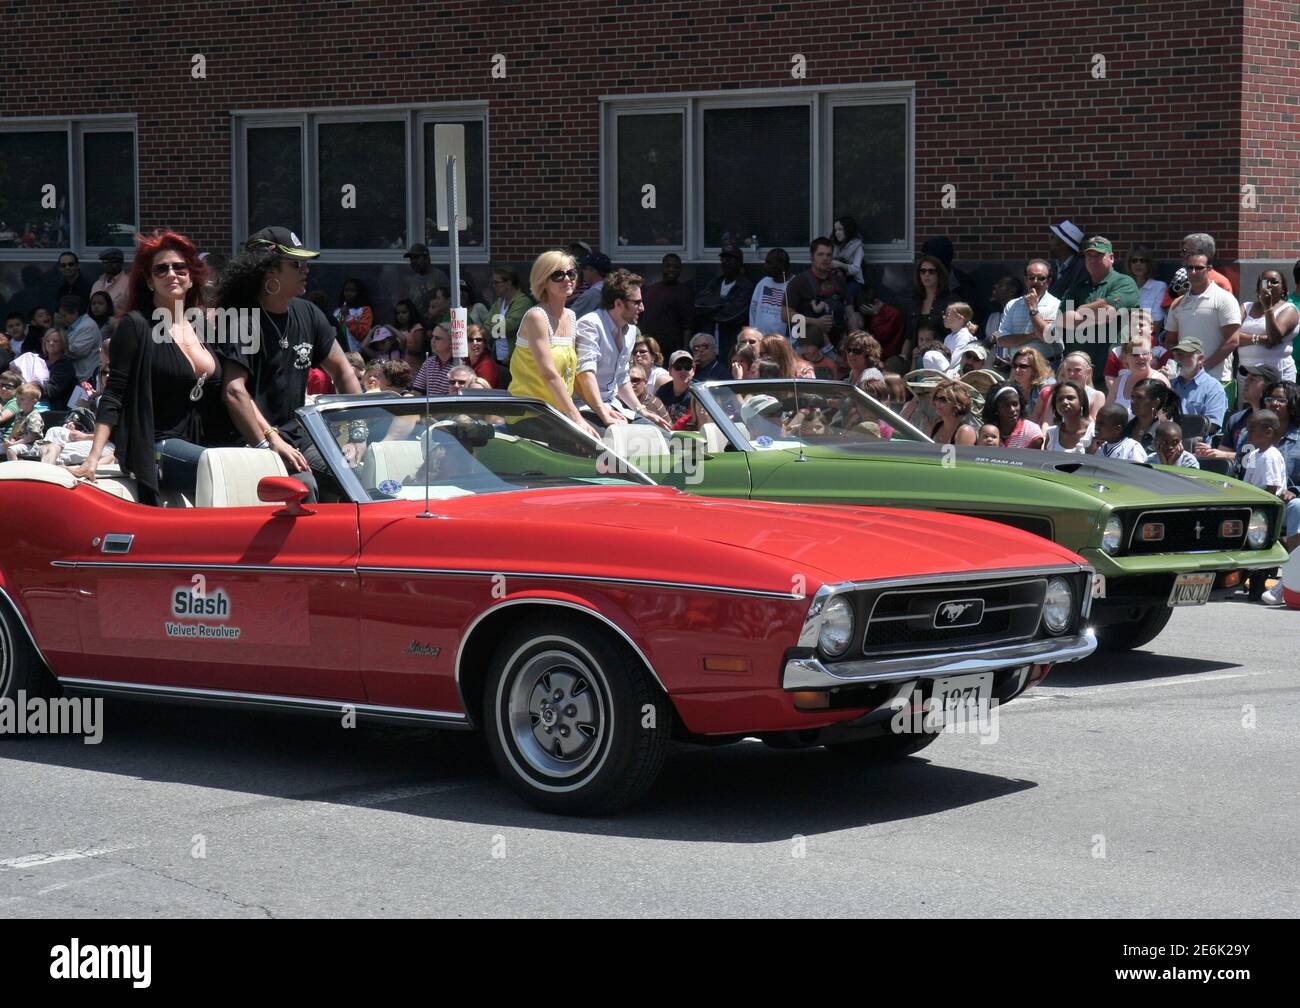 Rock Star Slash on 1971 Ford Mustang during Indy 500 Festival Parade at Downtown Indianapolis. Stock Photo